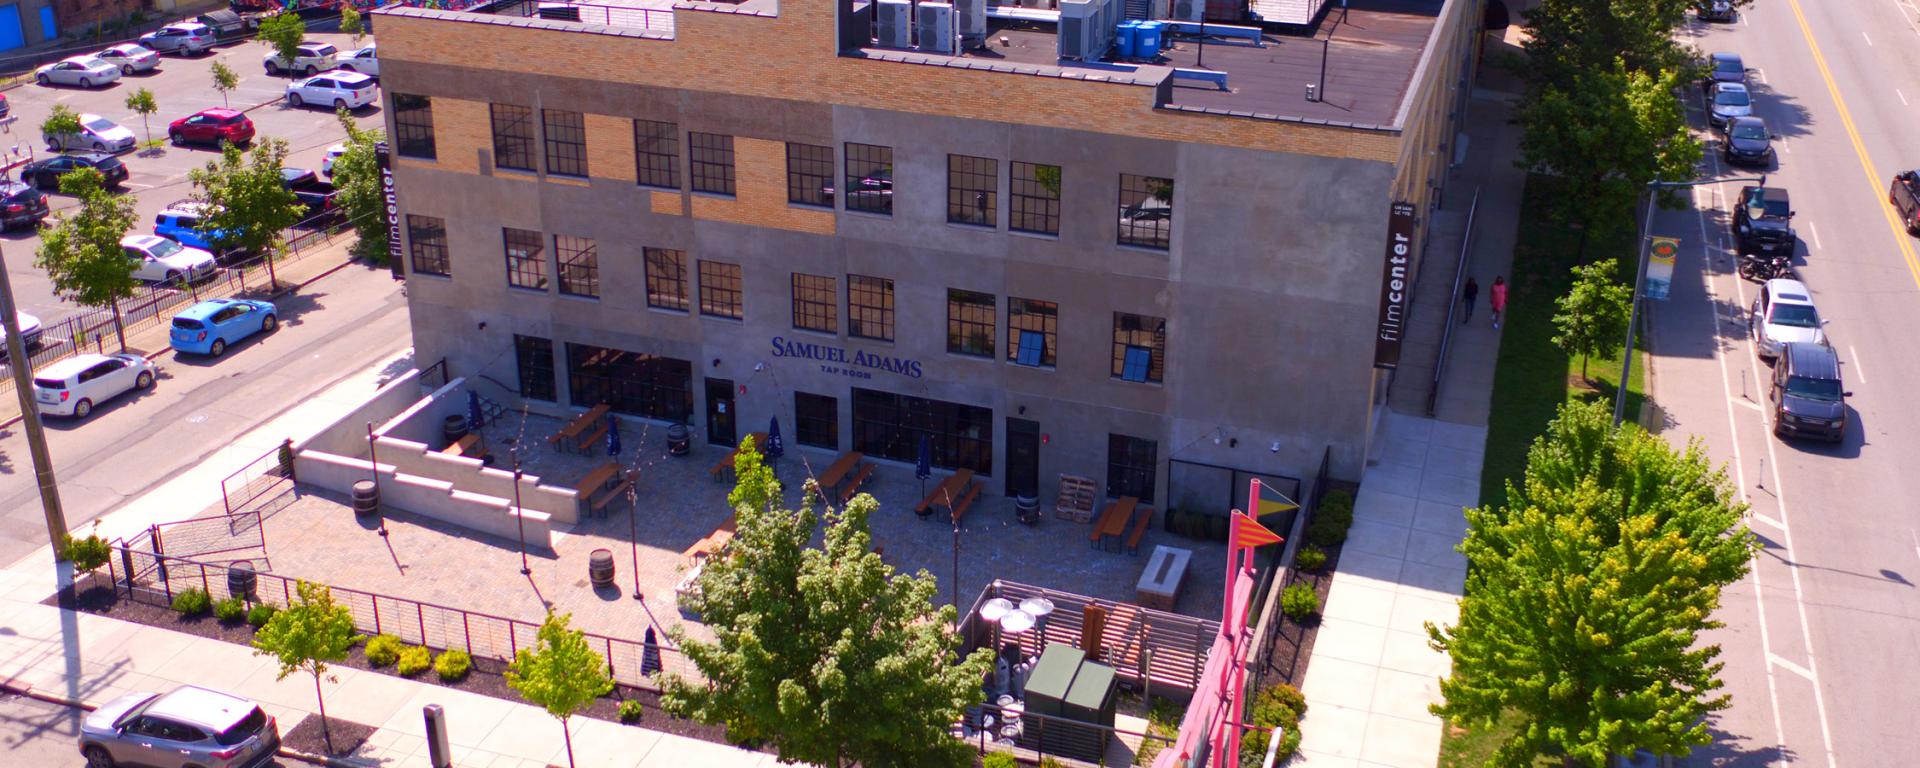 aerial photo of brewery patio